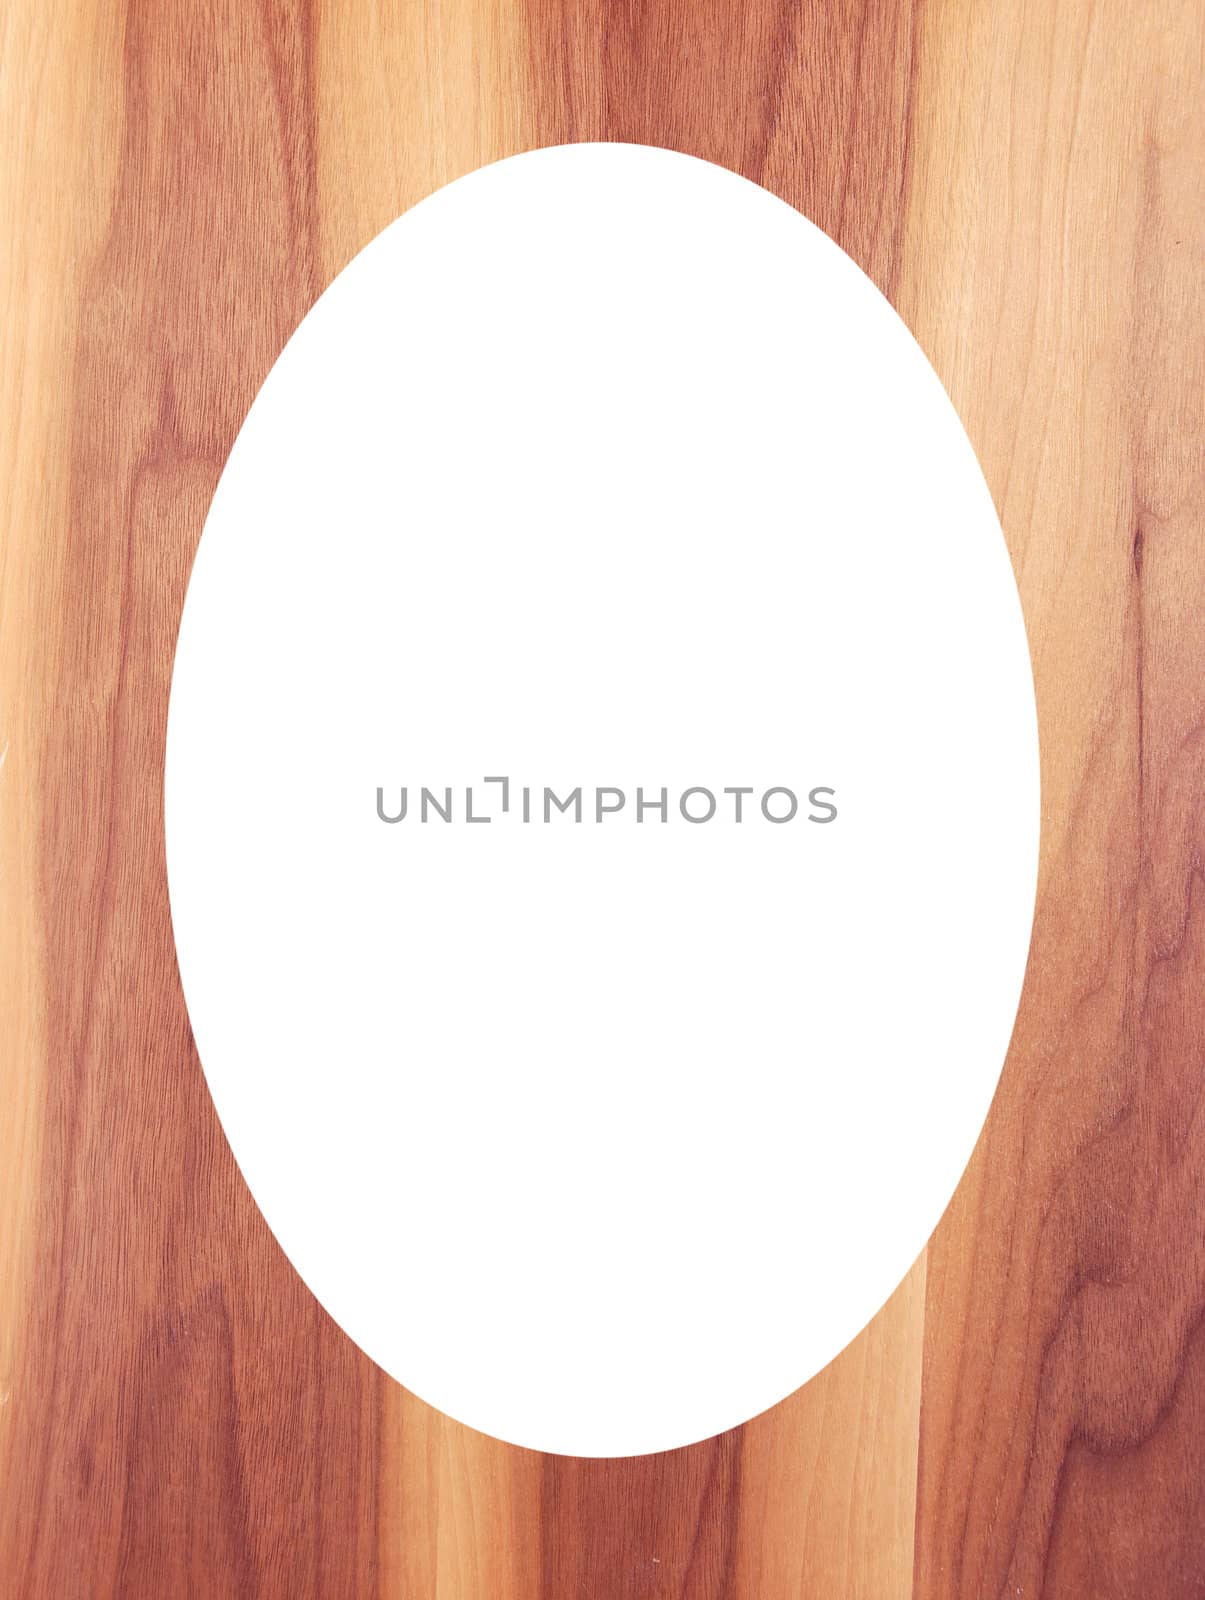 Wooden floor boards fragment. Wooden architectural backdrop. Isolated white oval place for text photograph image in center of frame.